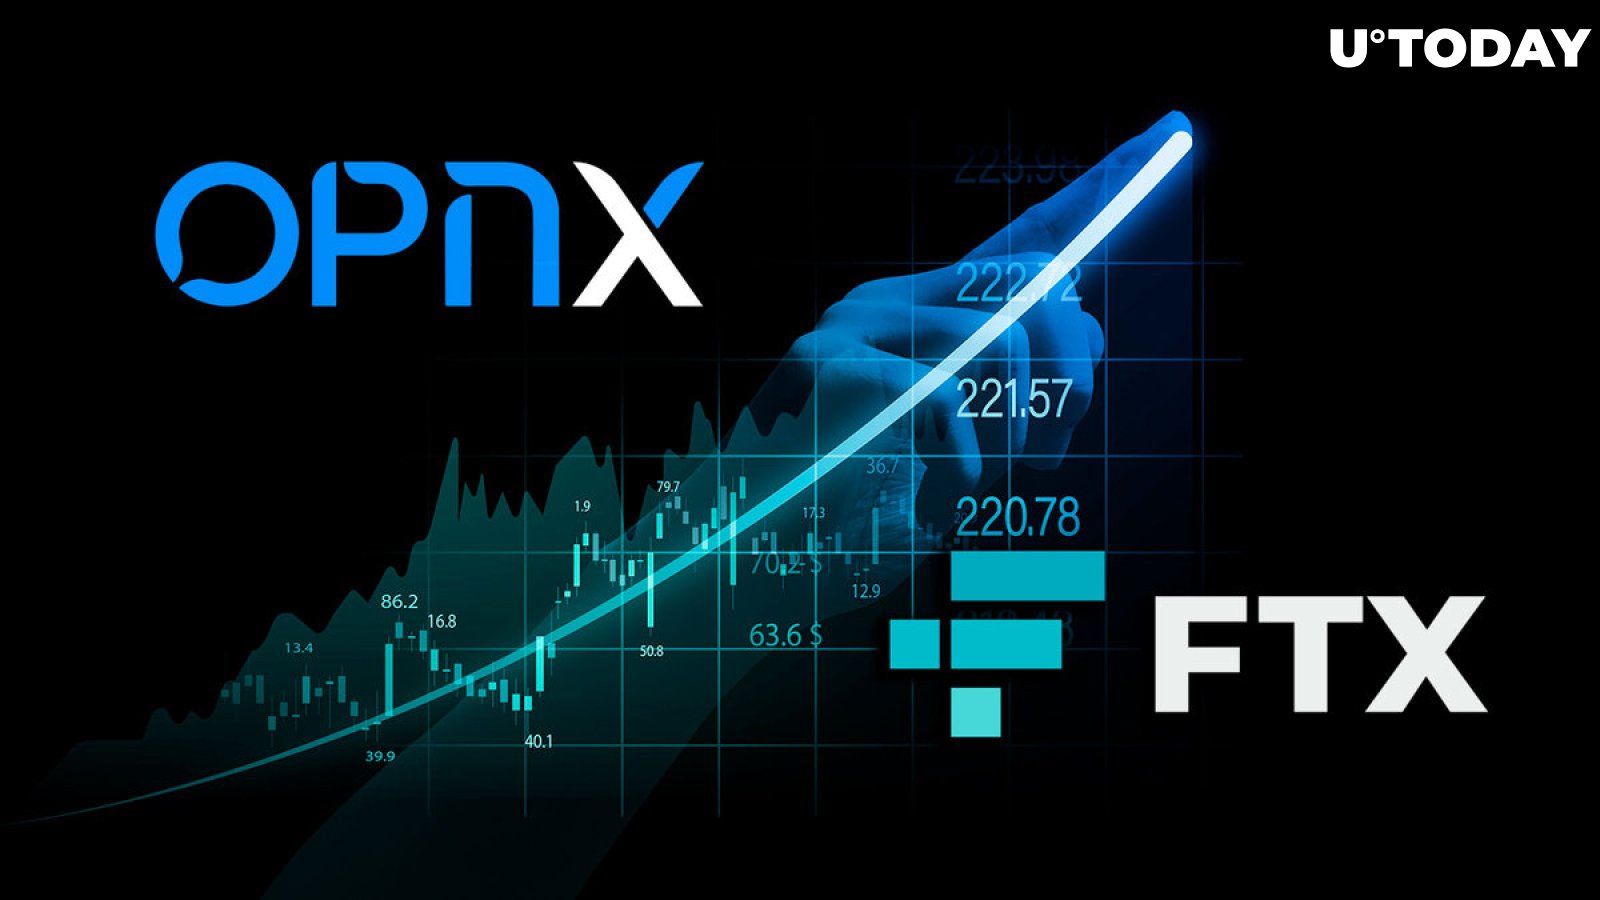 OPNX Exchange Gains Popularity Among FTX Collapse Victims